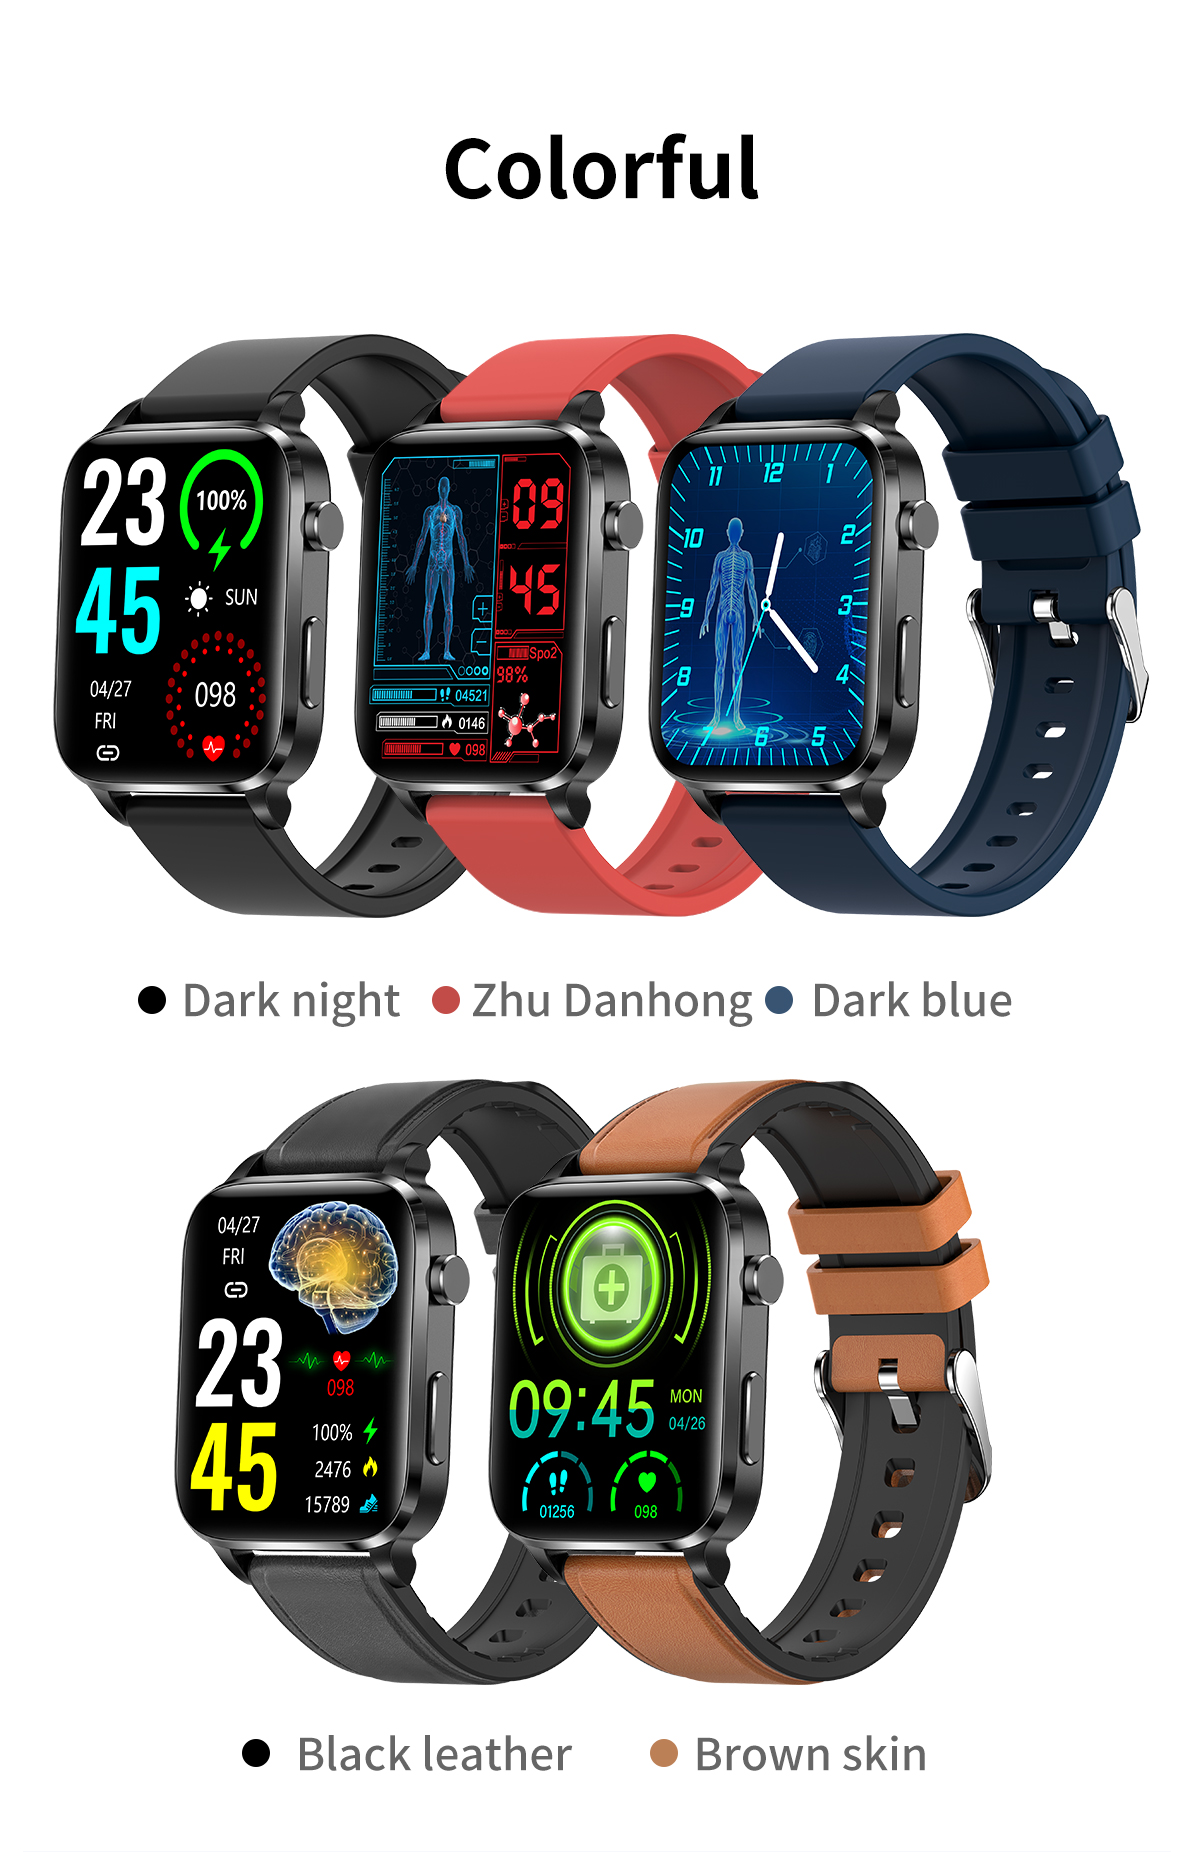 F100 1.7 inch HD Screen Dual Probe Laser Therapy Body Temperature Measurement Heart Rate Blood Pressure SpO2 Monitor Fitness Tracker Long Standby BT5.0 Smart Watch